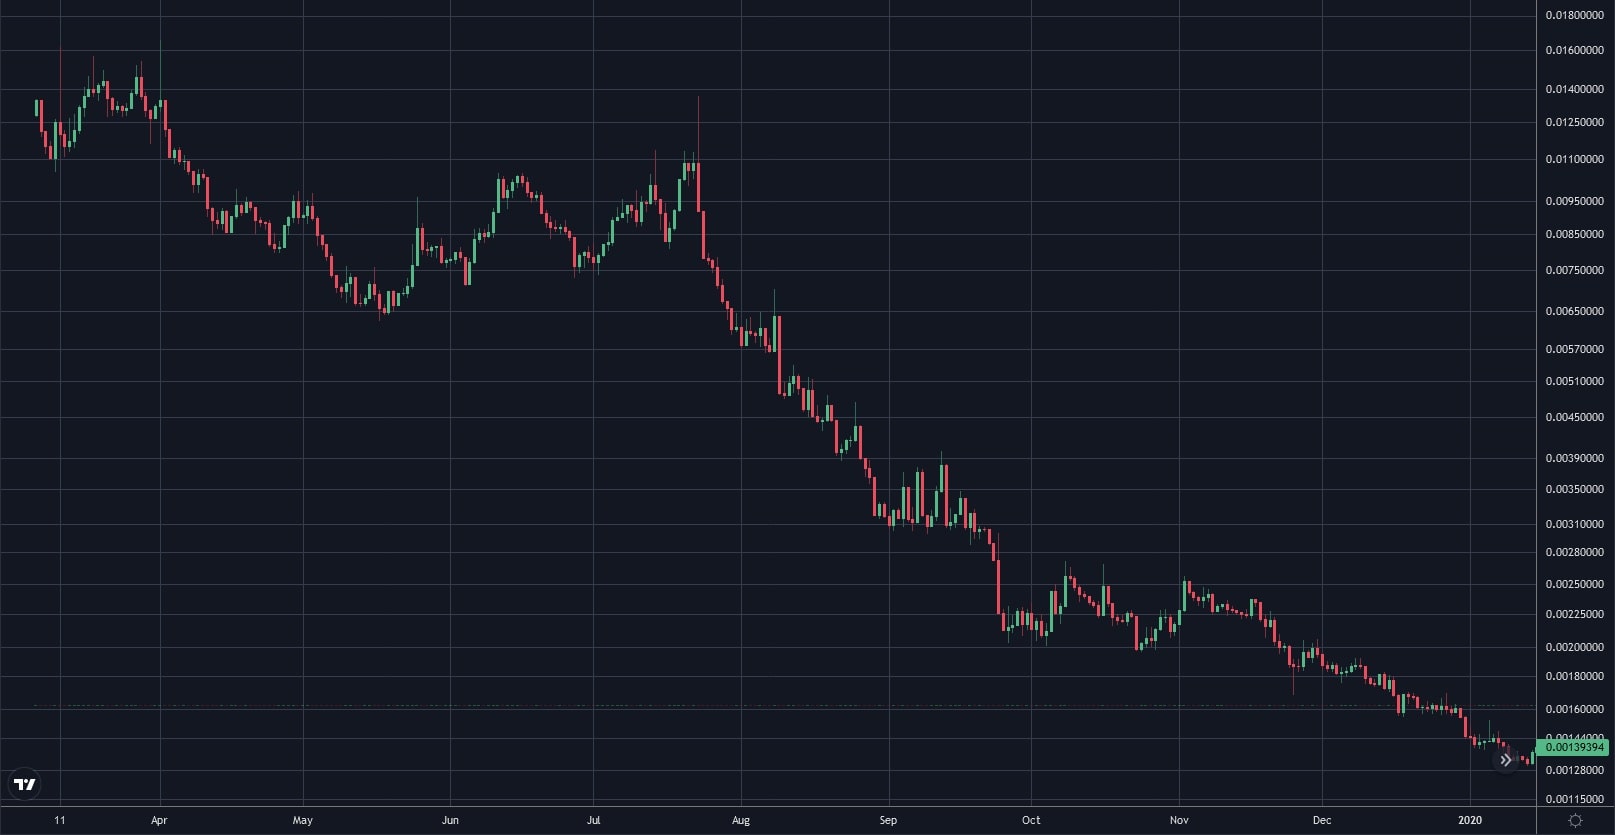 ANKR/USD daily logarithmic chart in 2019